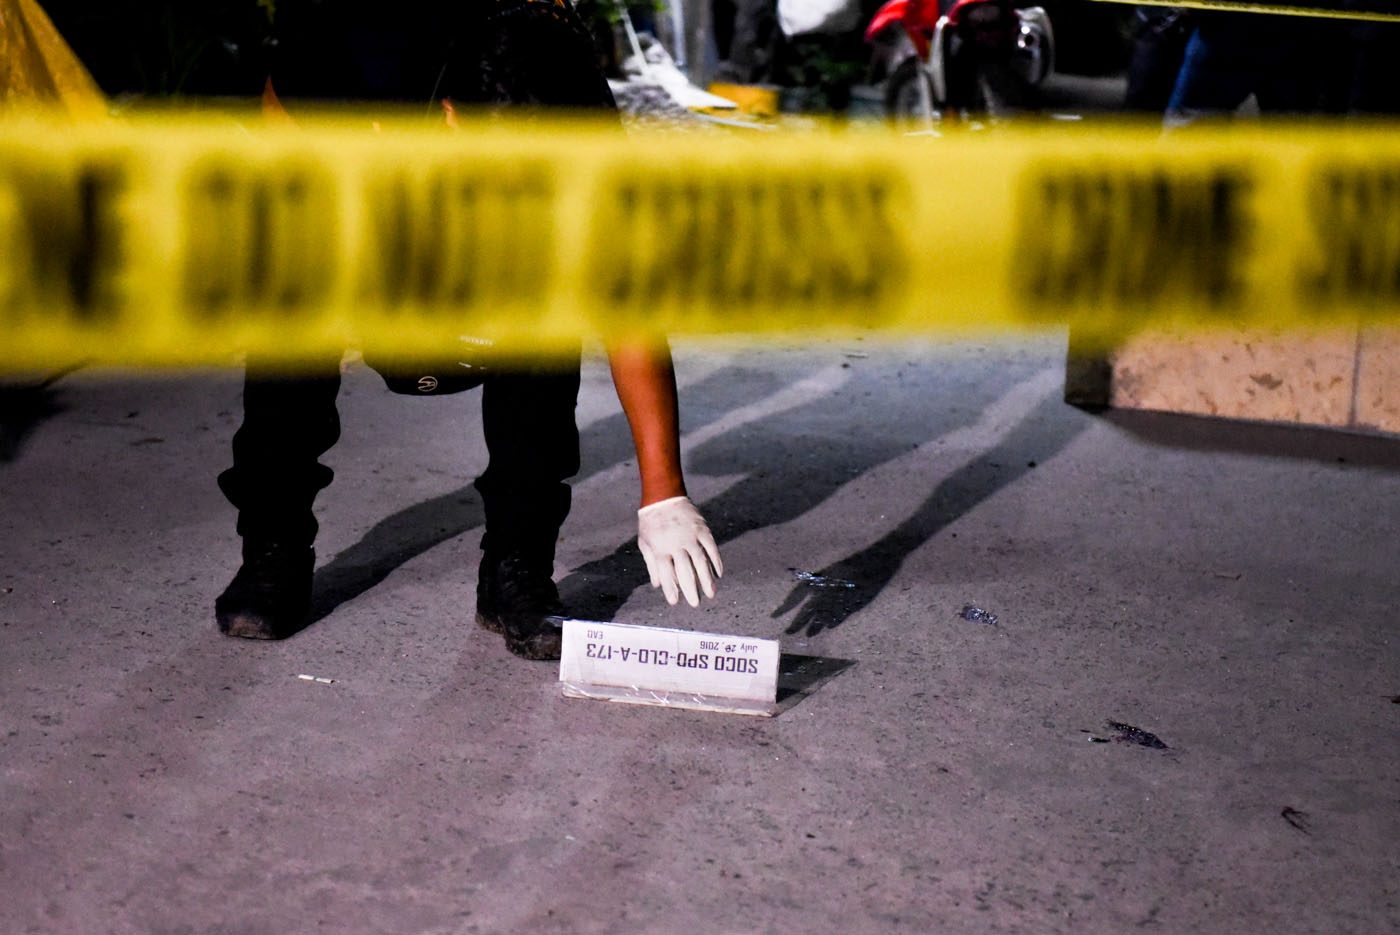 CRIME SCENE. A buy-bust operation in Taguig City on July 28, 2016 ends with deaths. Photo by Alecs Ongcal/Rappler 